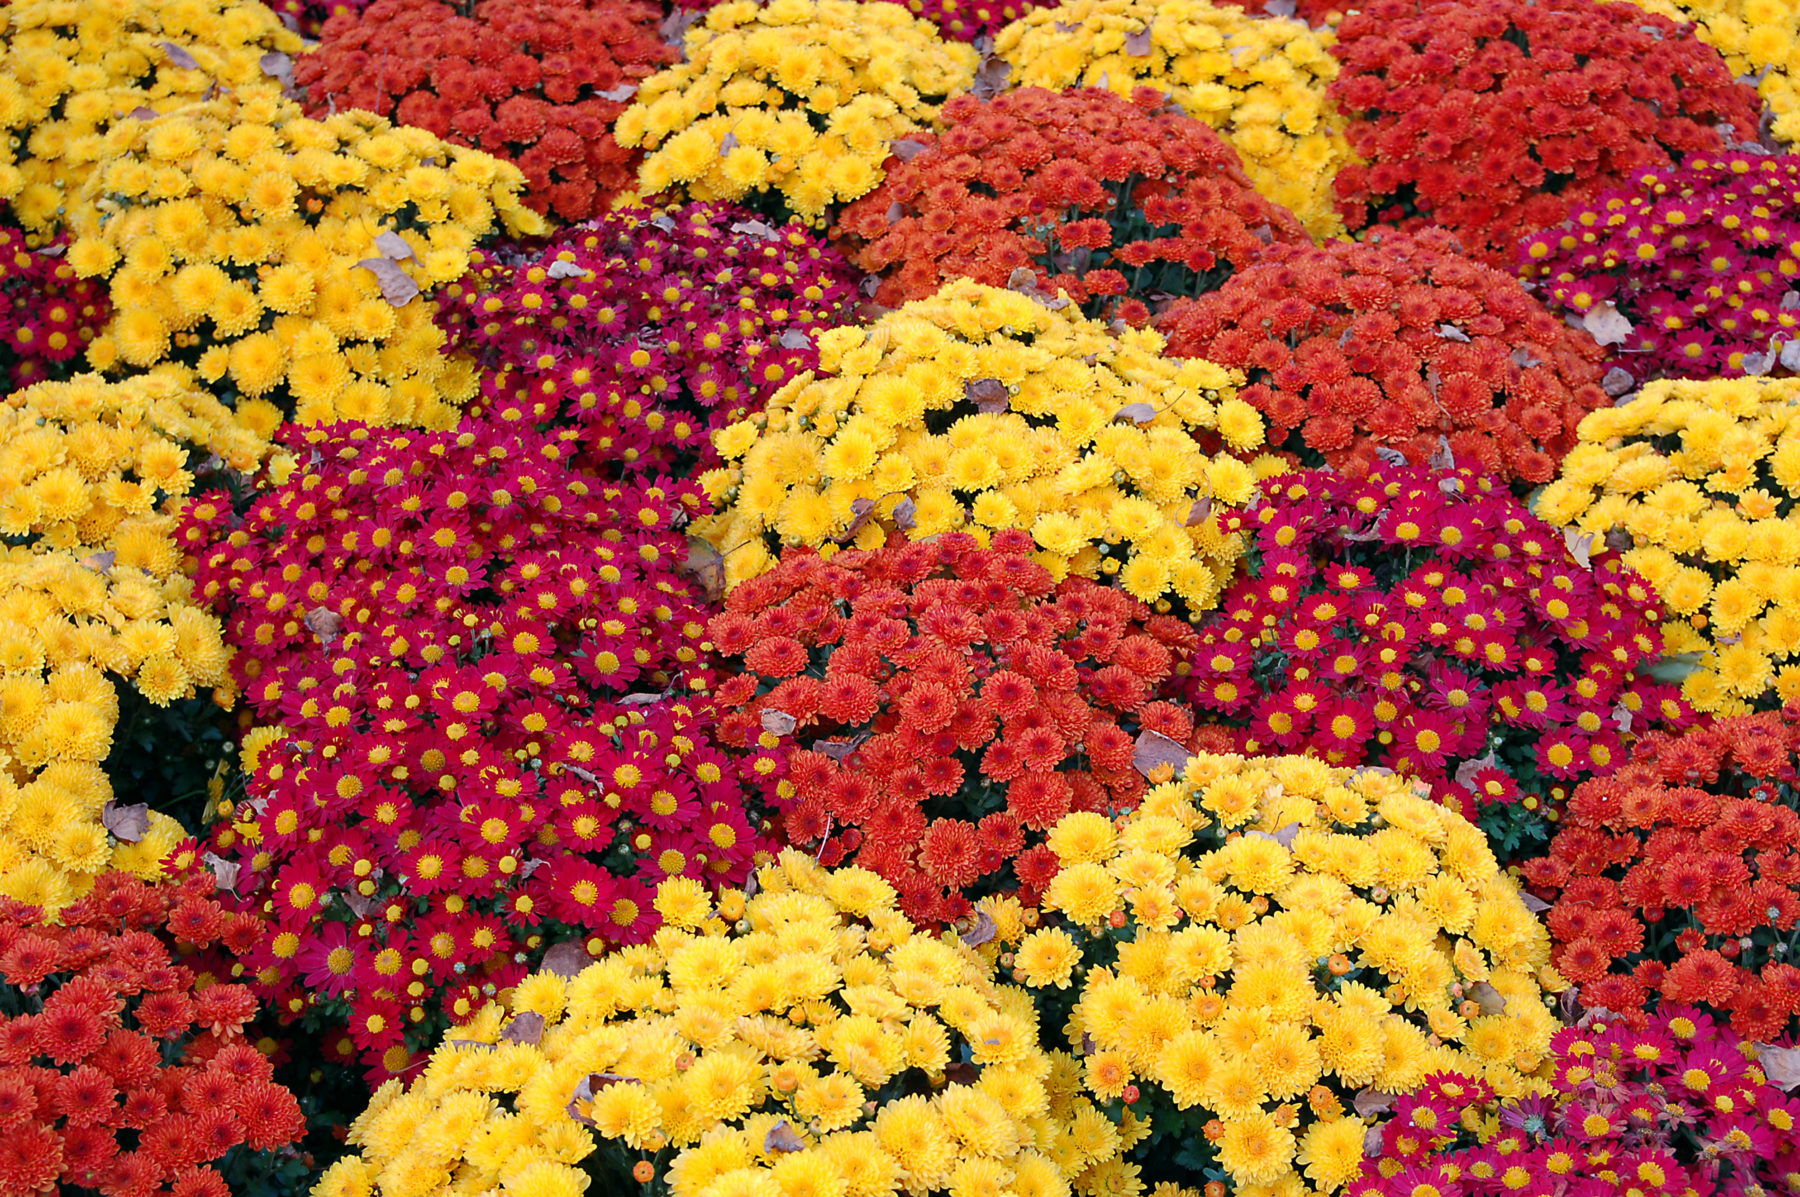 Mums 101: Everything you need to know about fall's favorite flower